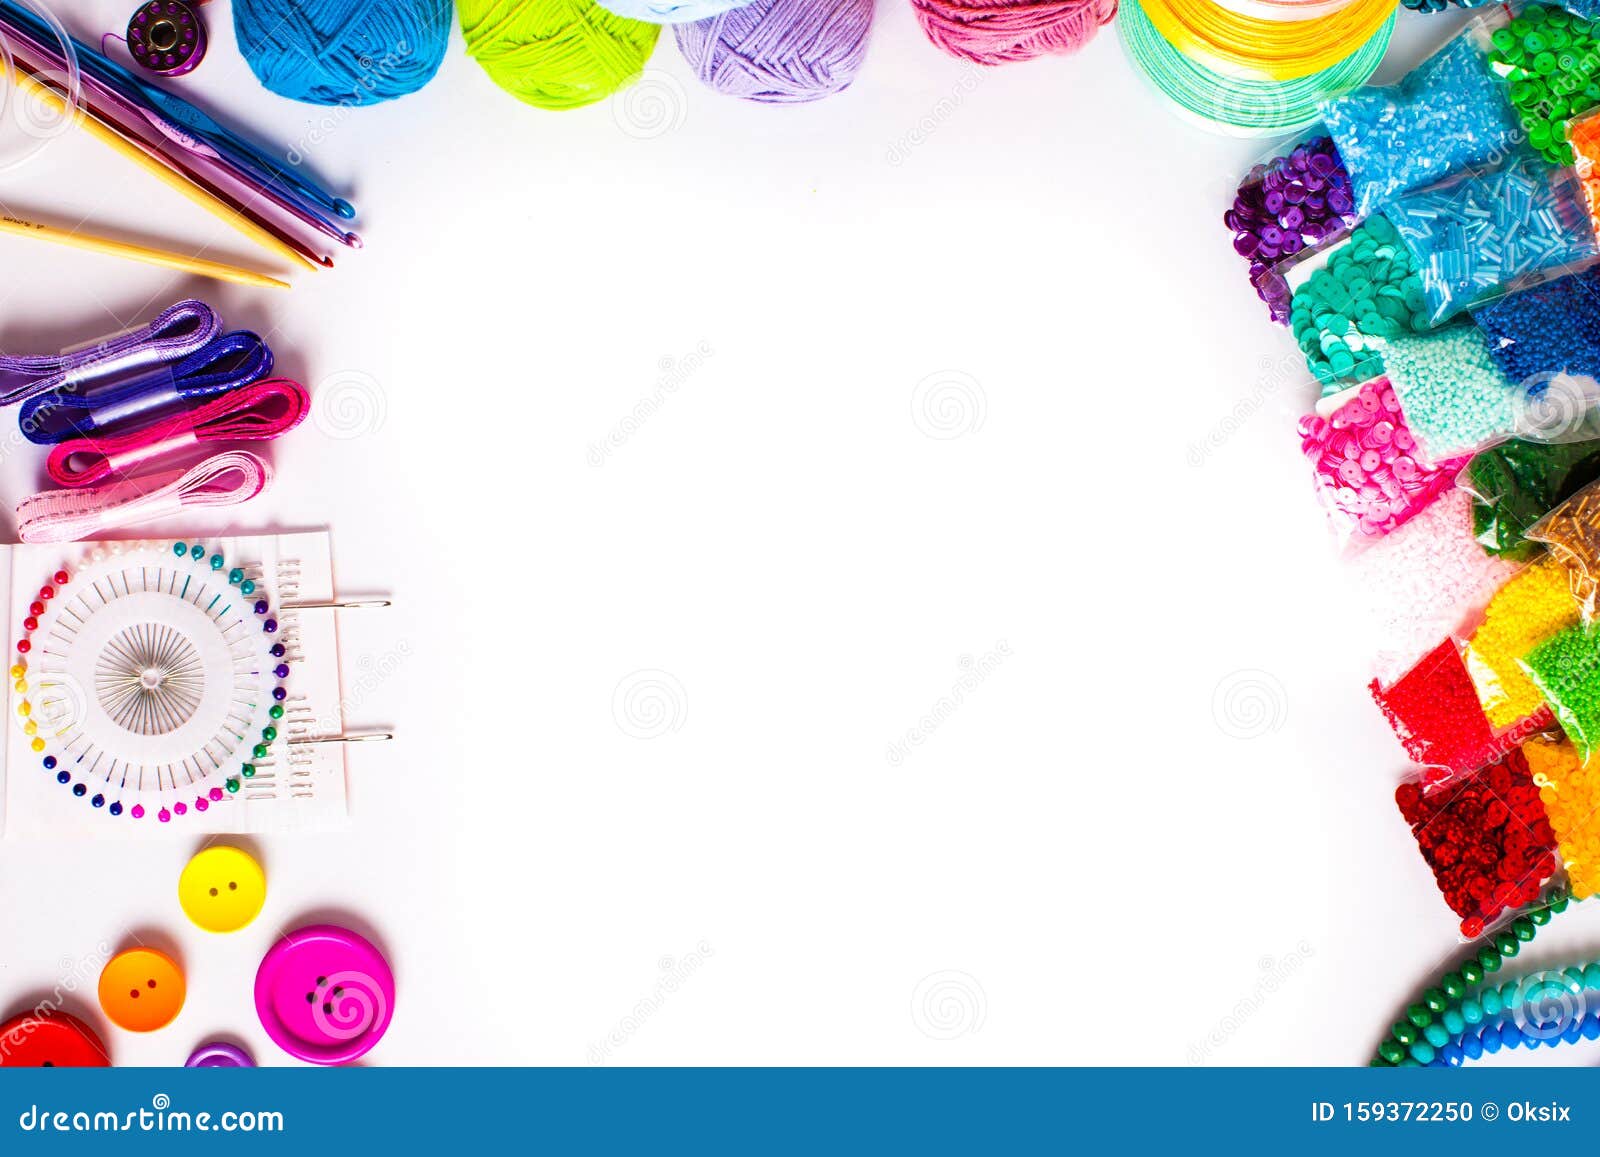 Craft Supplies for Creative Handmade, Top View Border Stock Photo - Image  of frame, buttons: 159372250